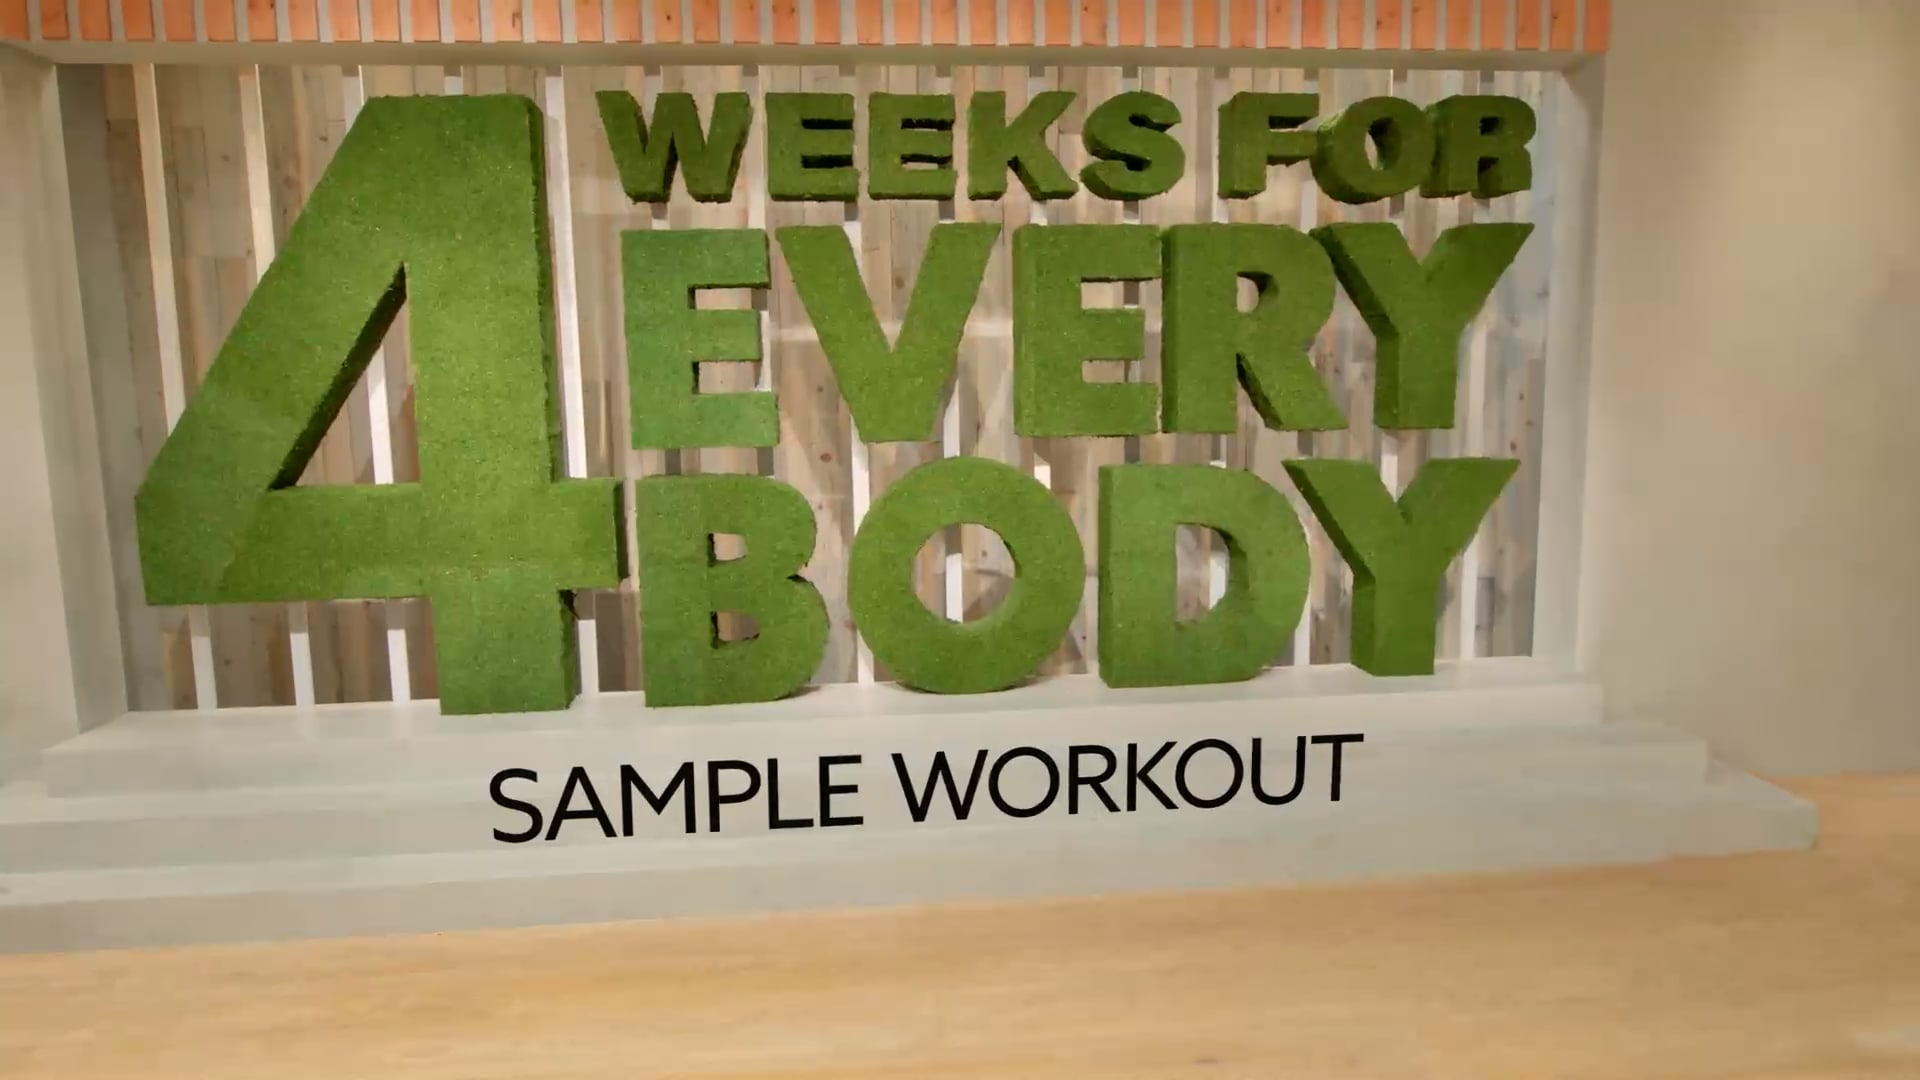 4 Weeks for Every Body Sample Workout